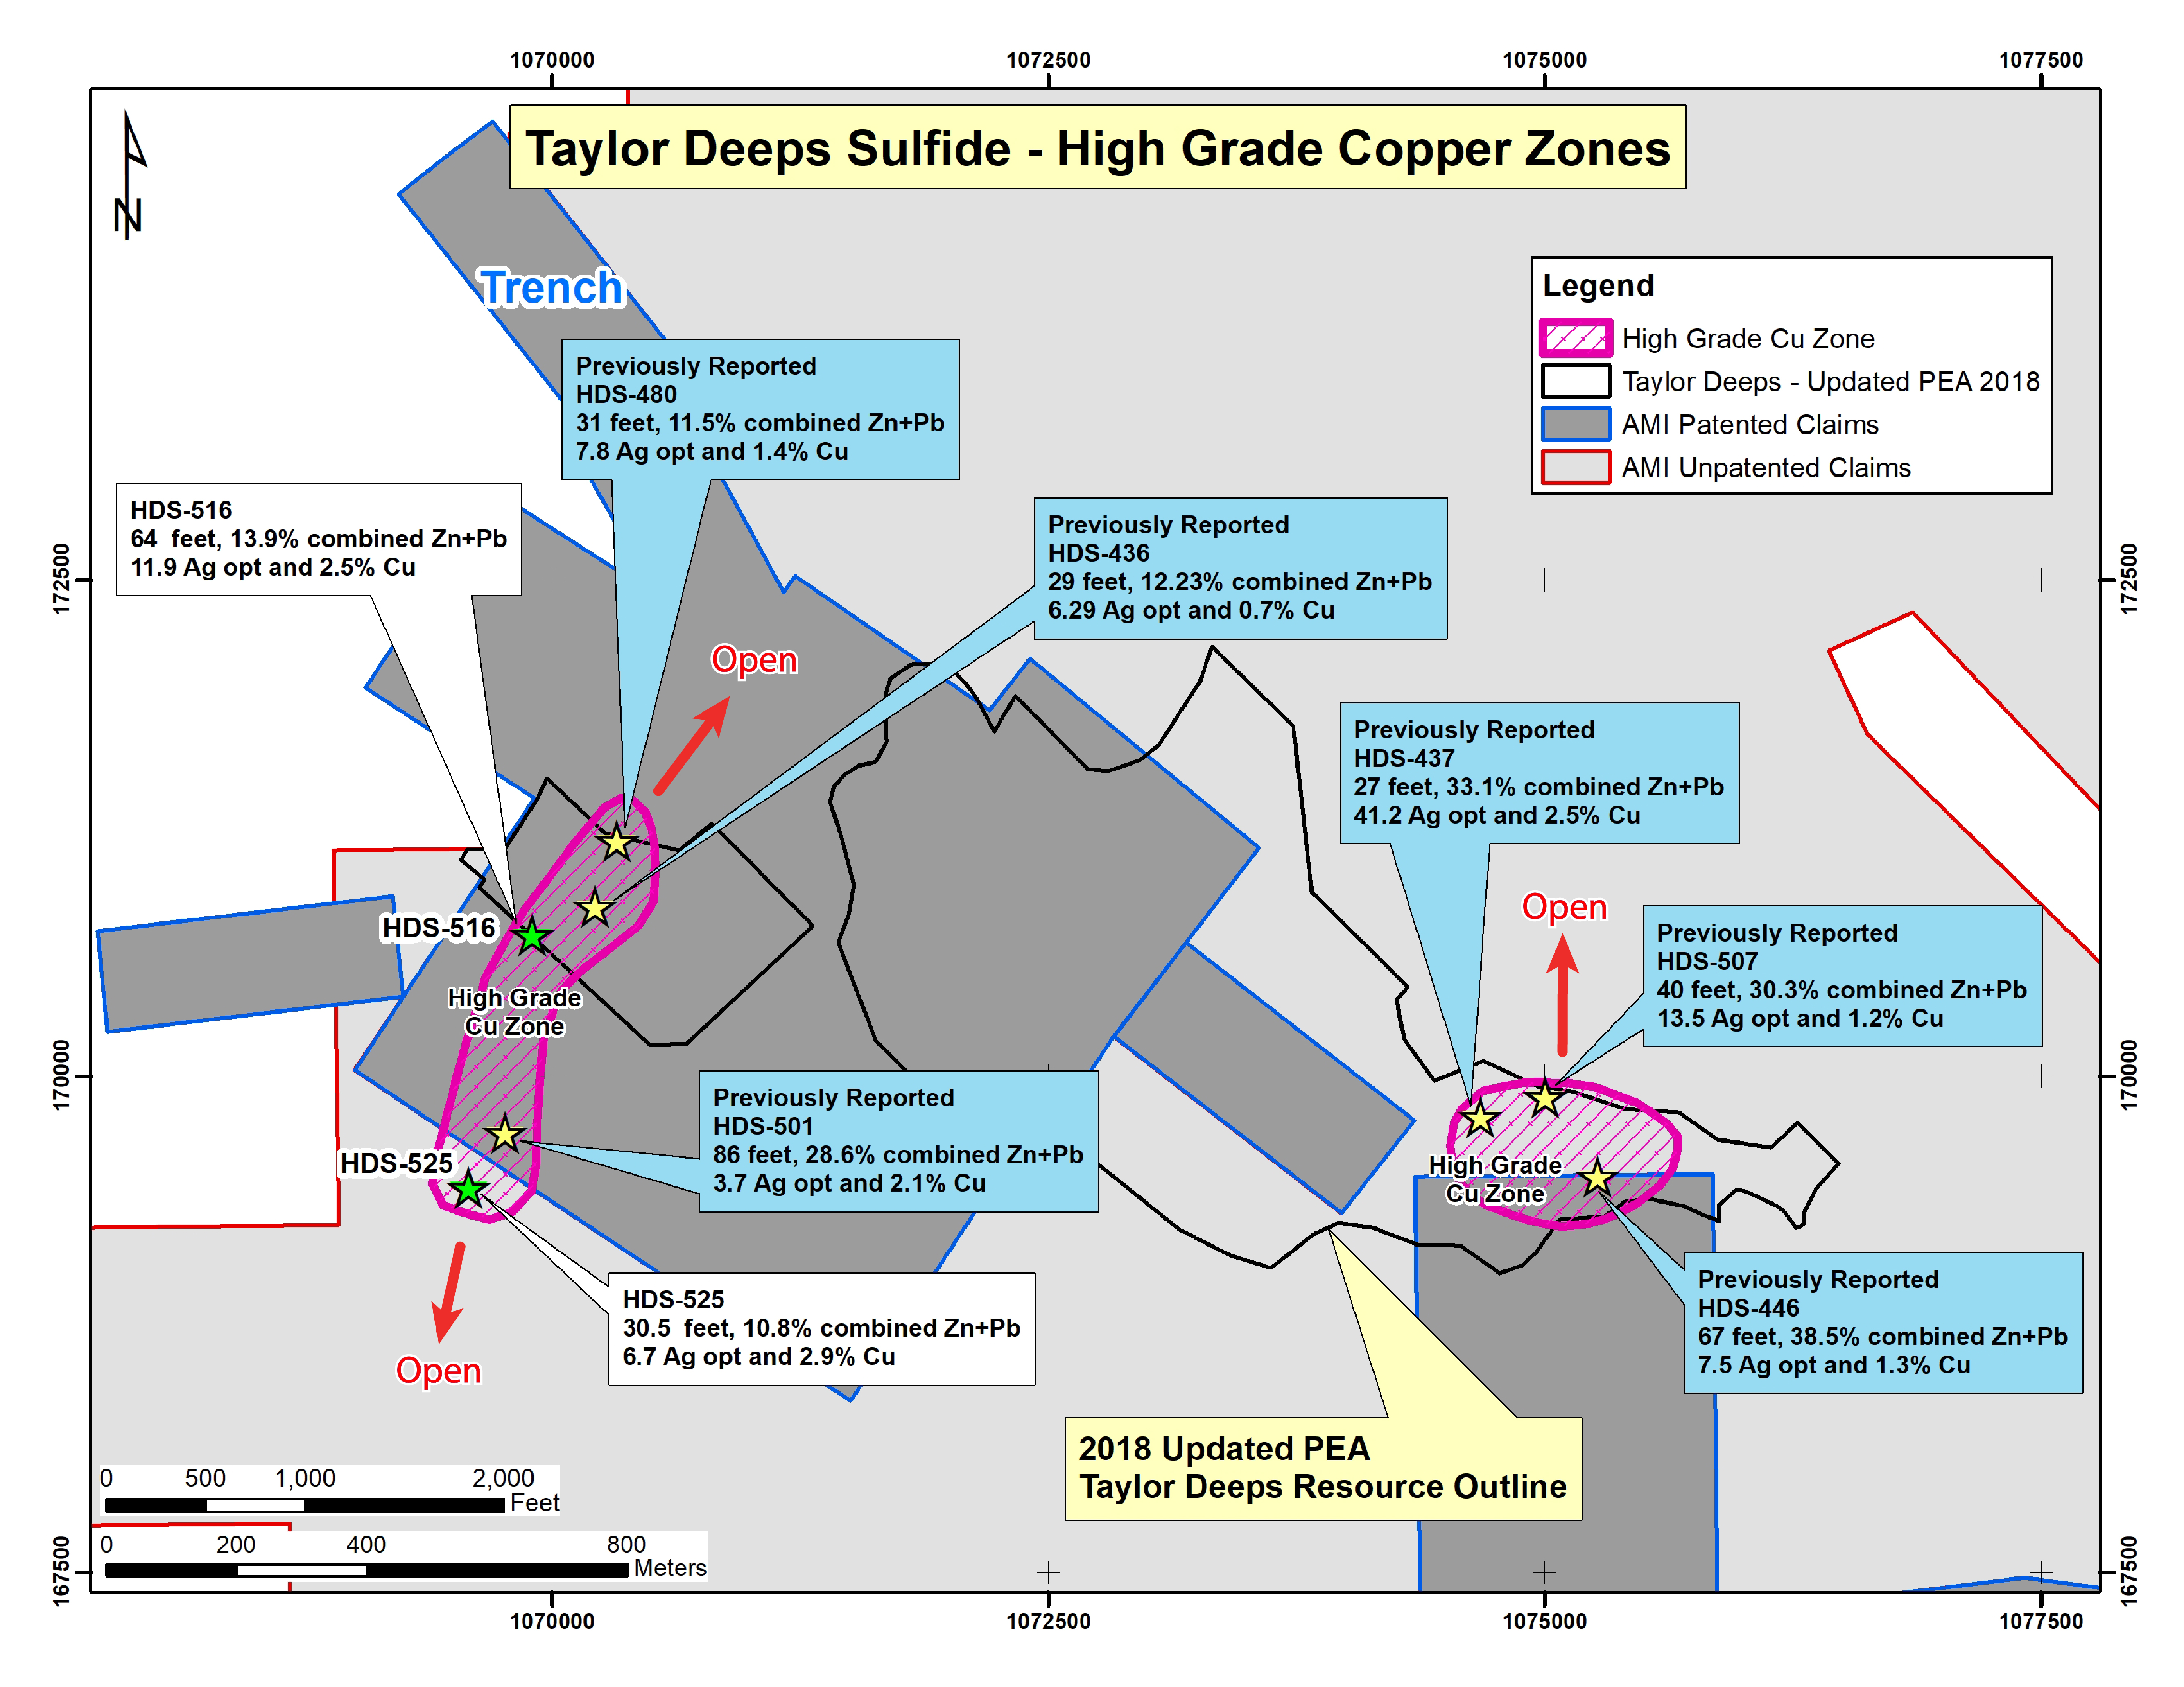 Figure 3. Plan View of Taylor Deeps with High Grade Copper Zones